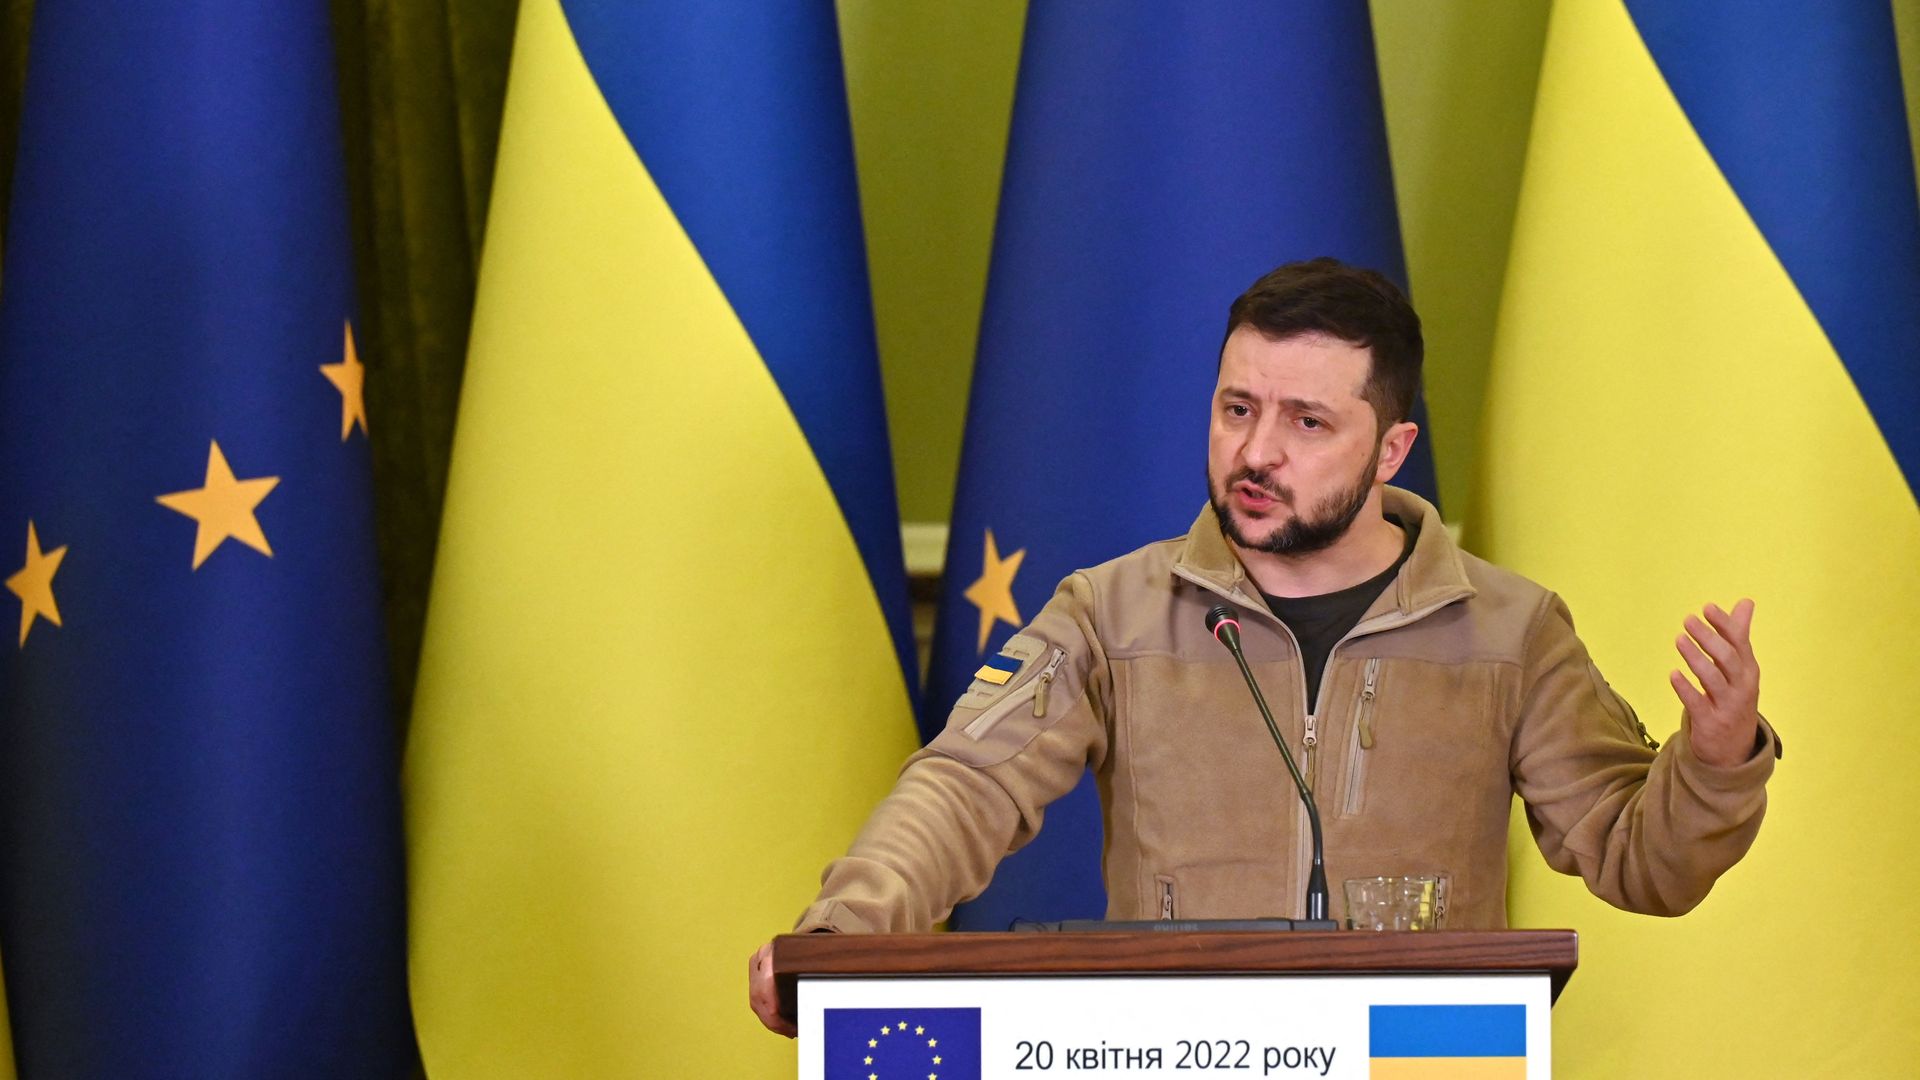 Ukraine's President Volodymyr Zelensky speaking during a press conference in Kyiv on April 20.